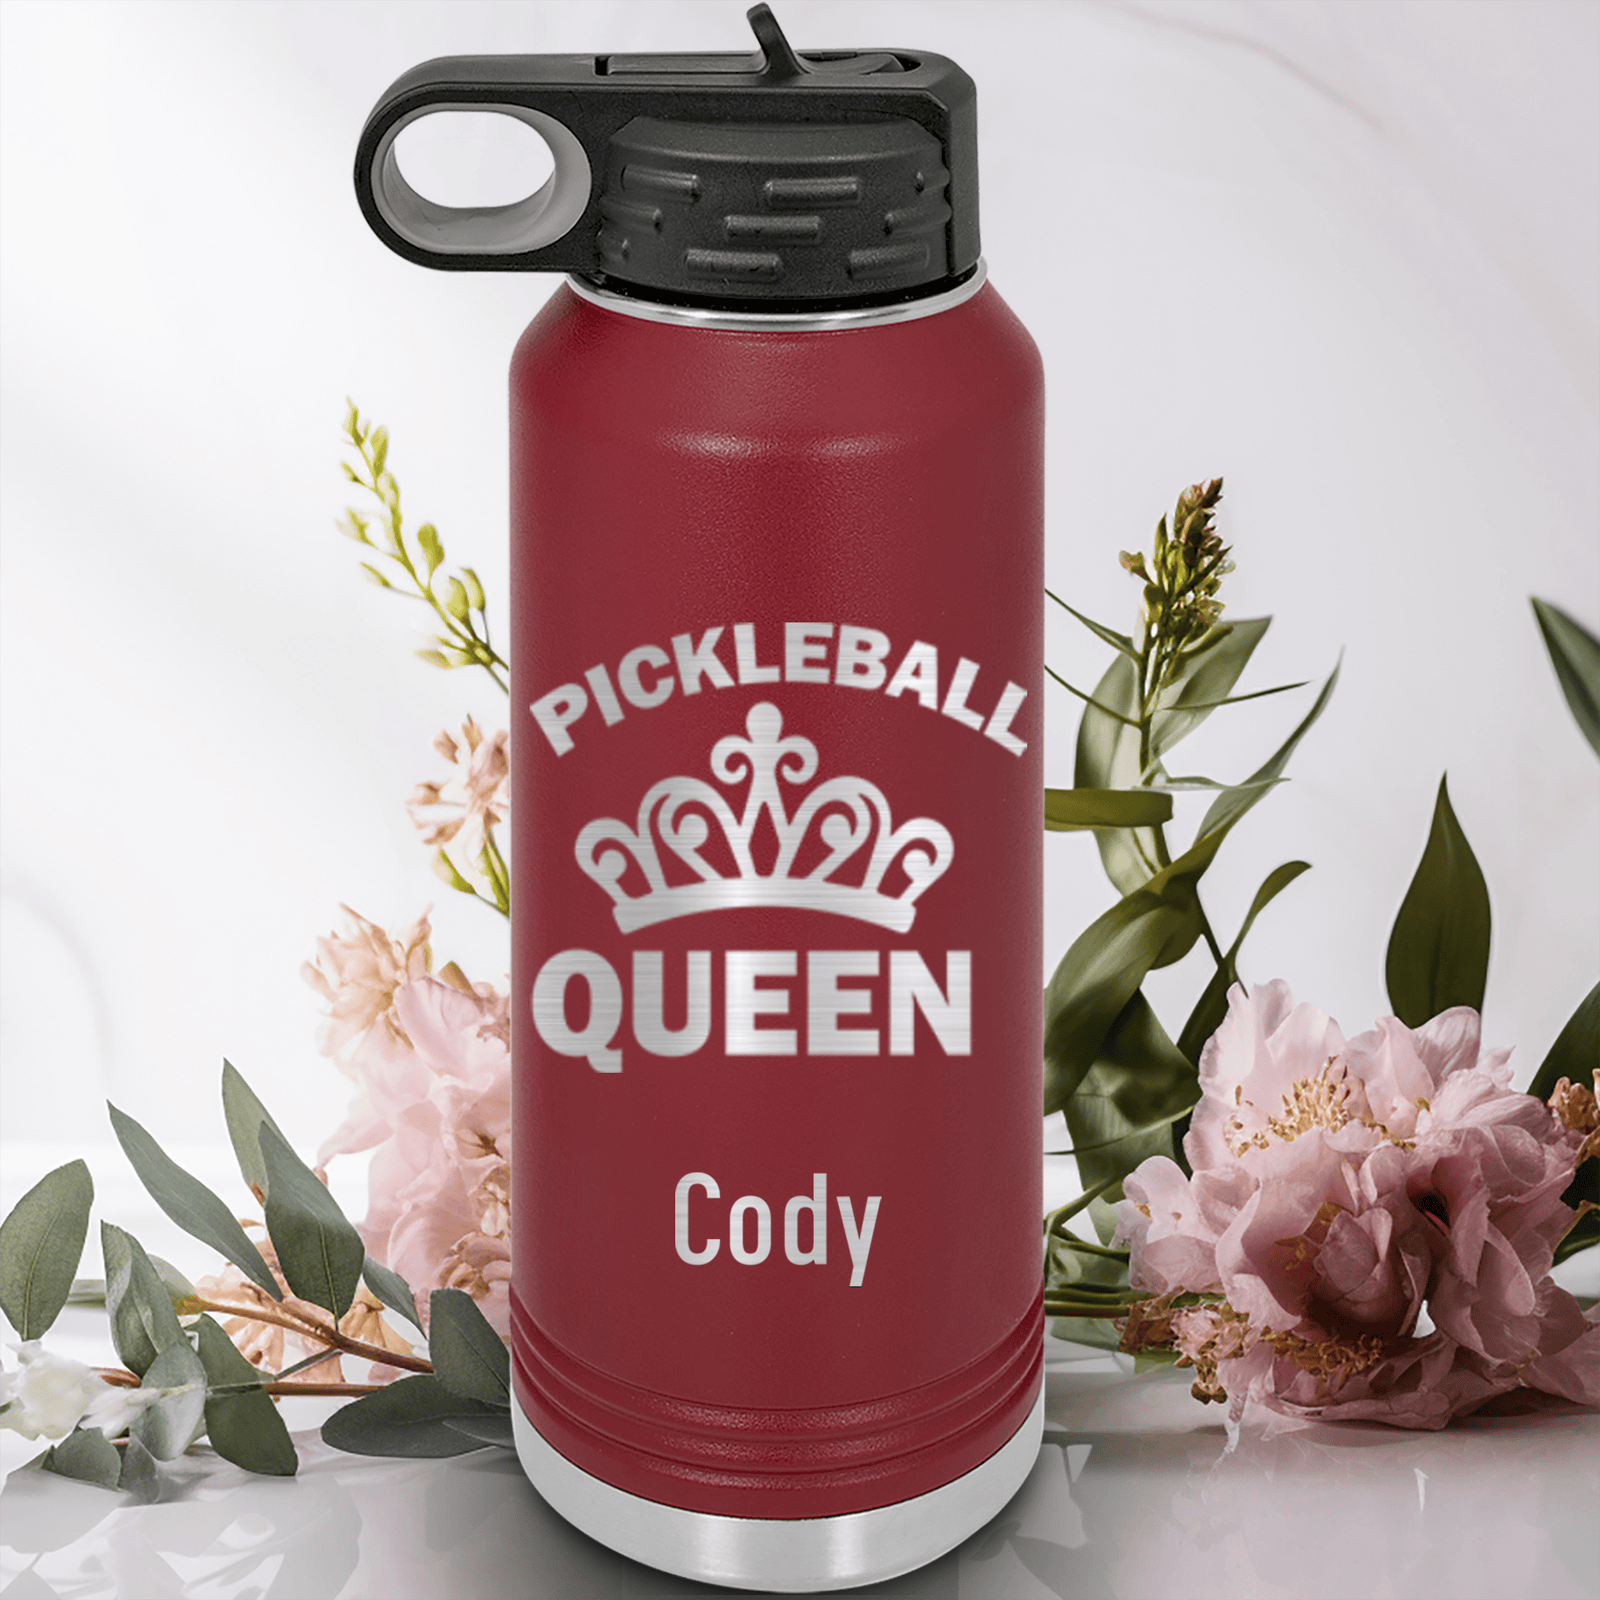 Maroon Pickleball Water Bottle With The Pickleball Queen Design